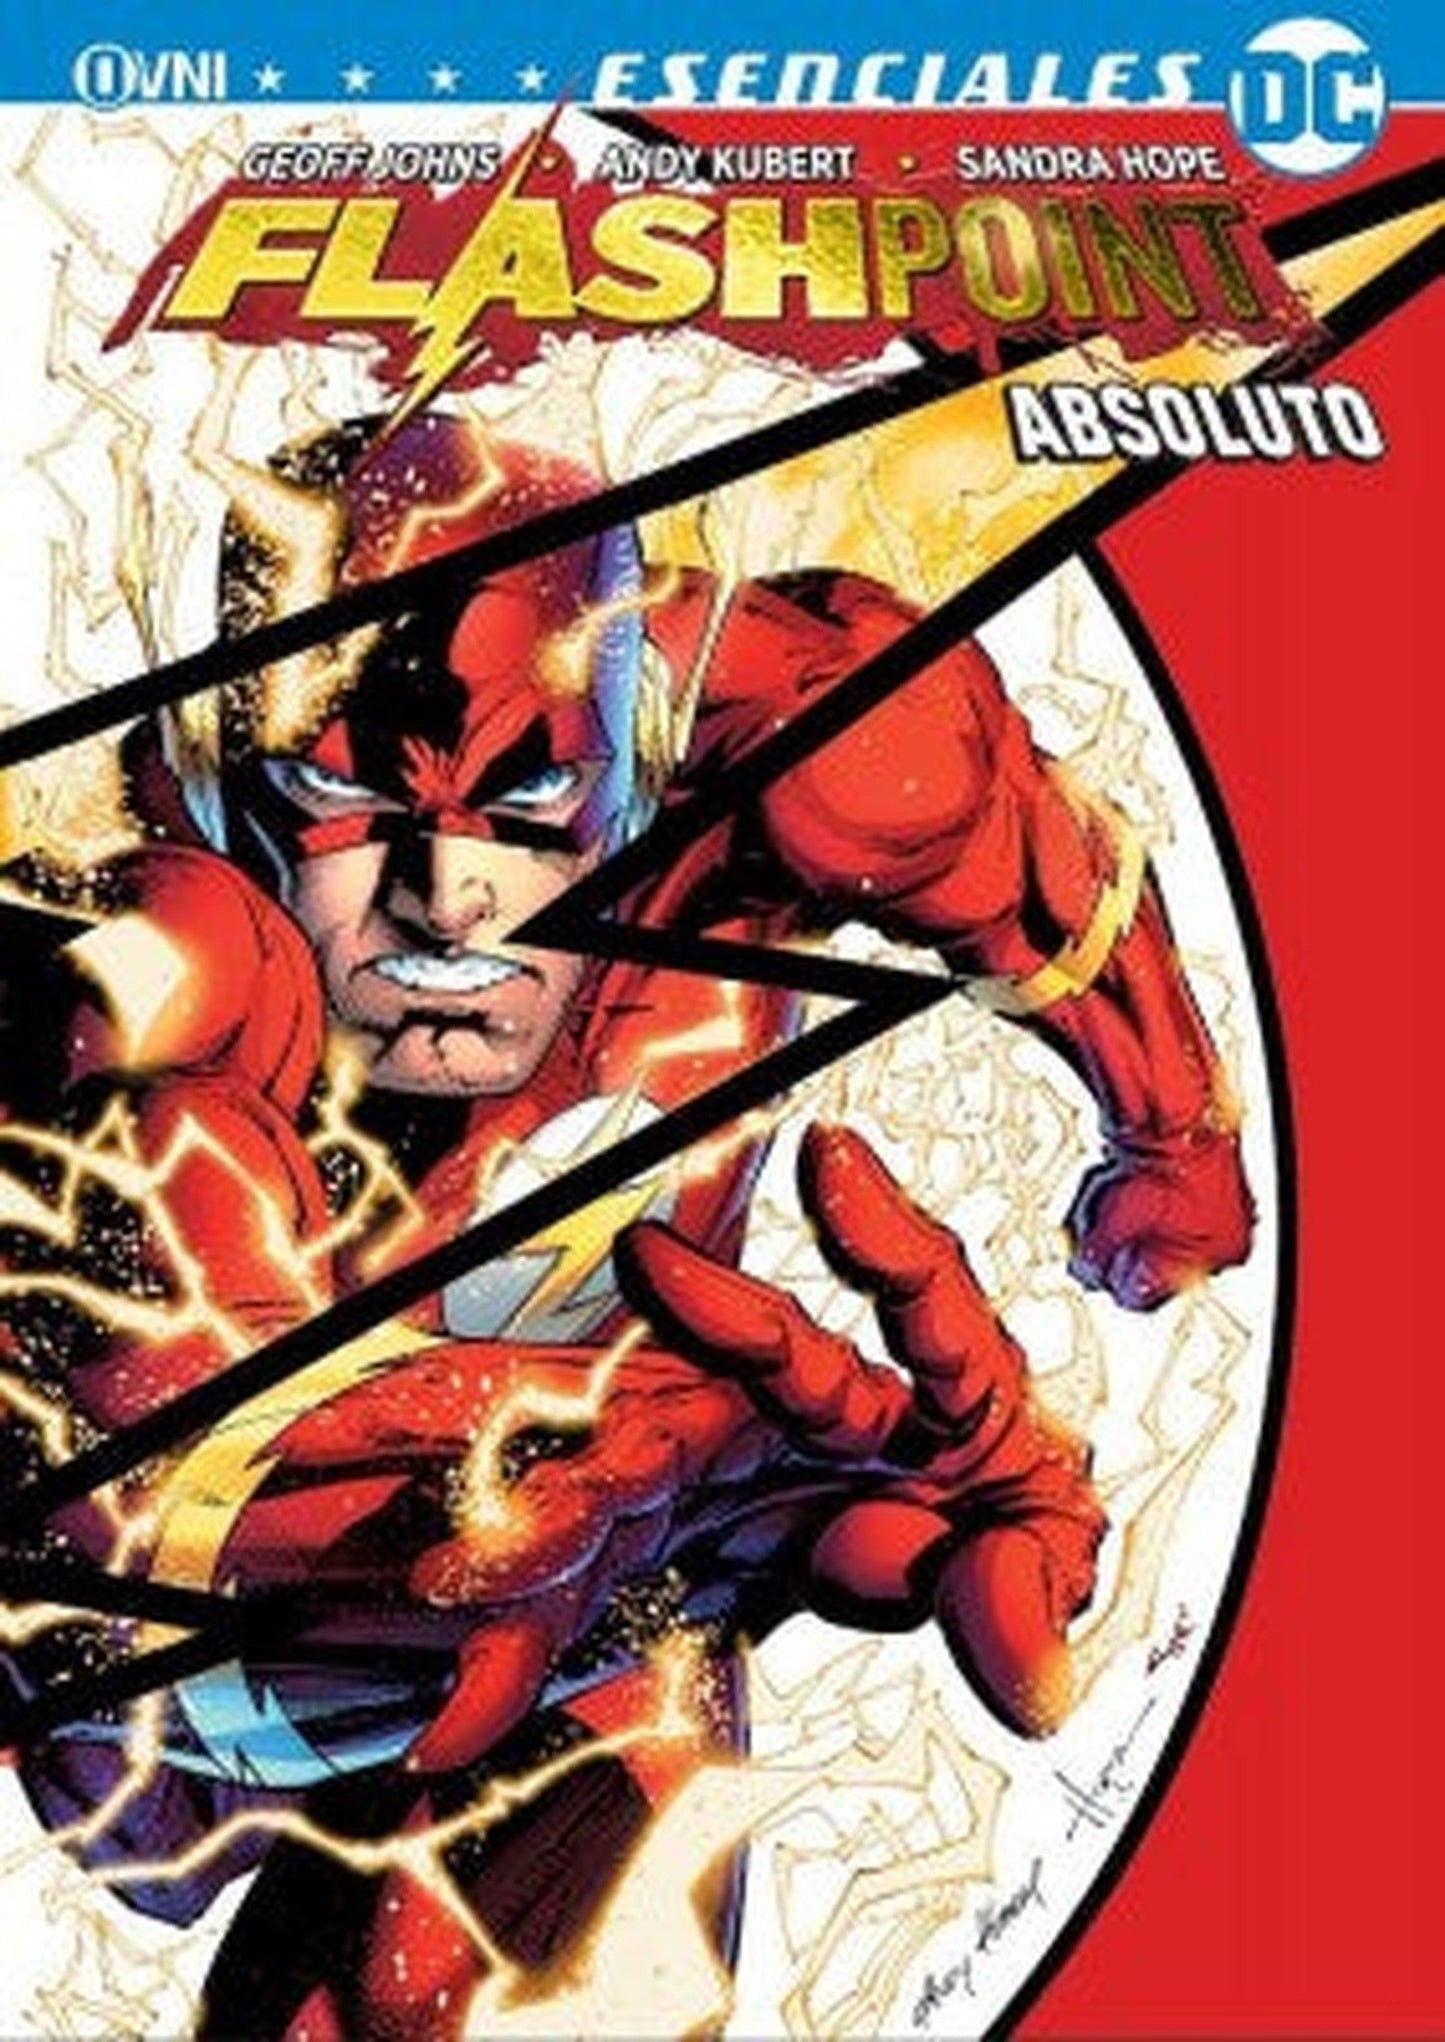 Flashpoint Absoluto